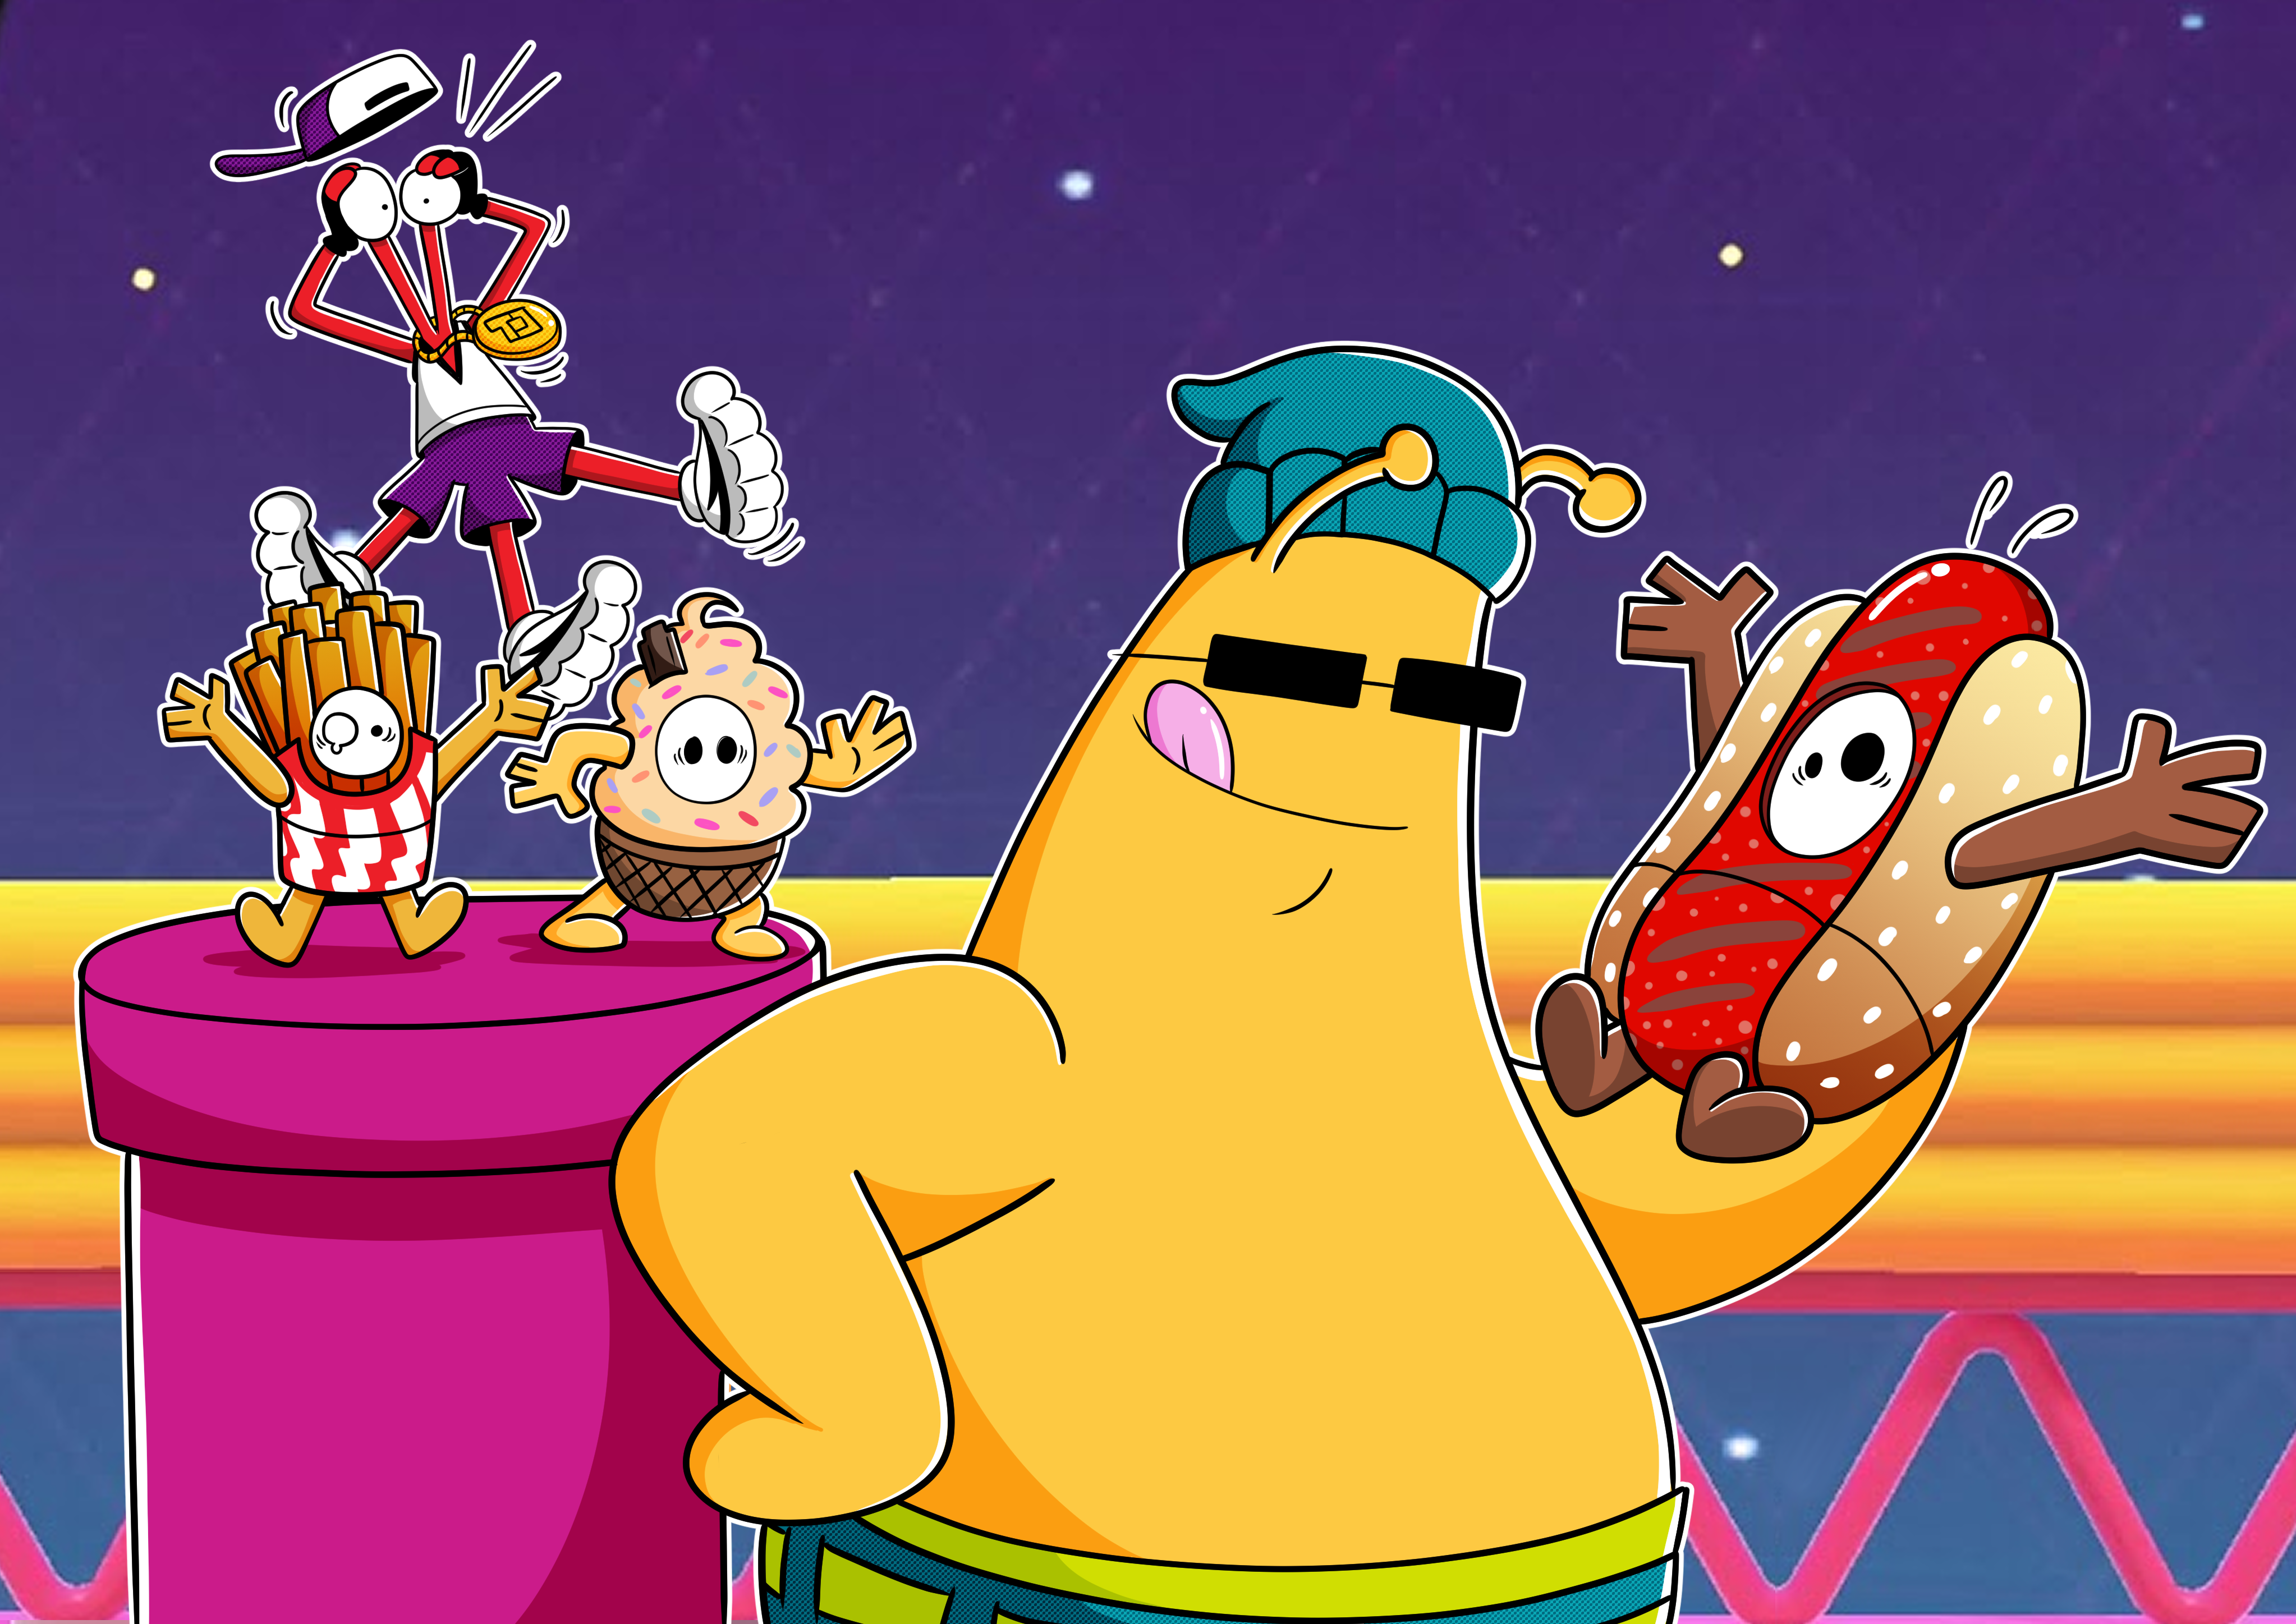 ToeJam & Earl is the next free Epic Games Store game